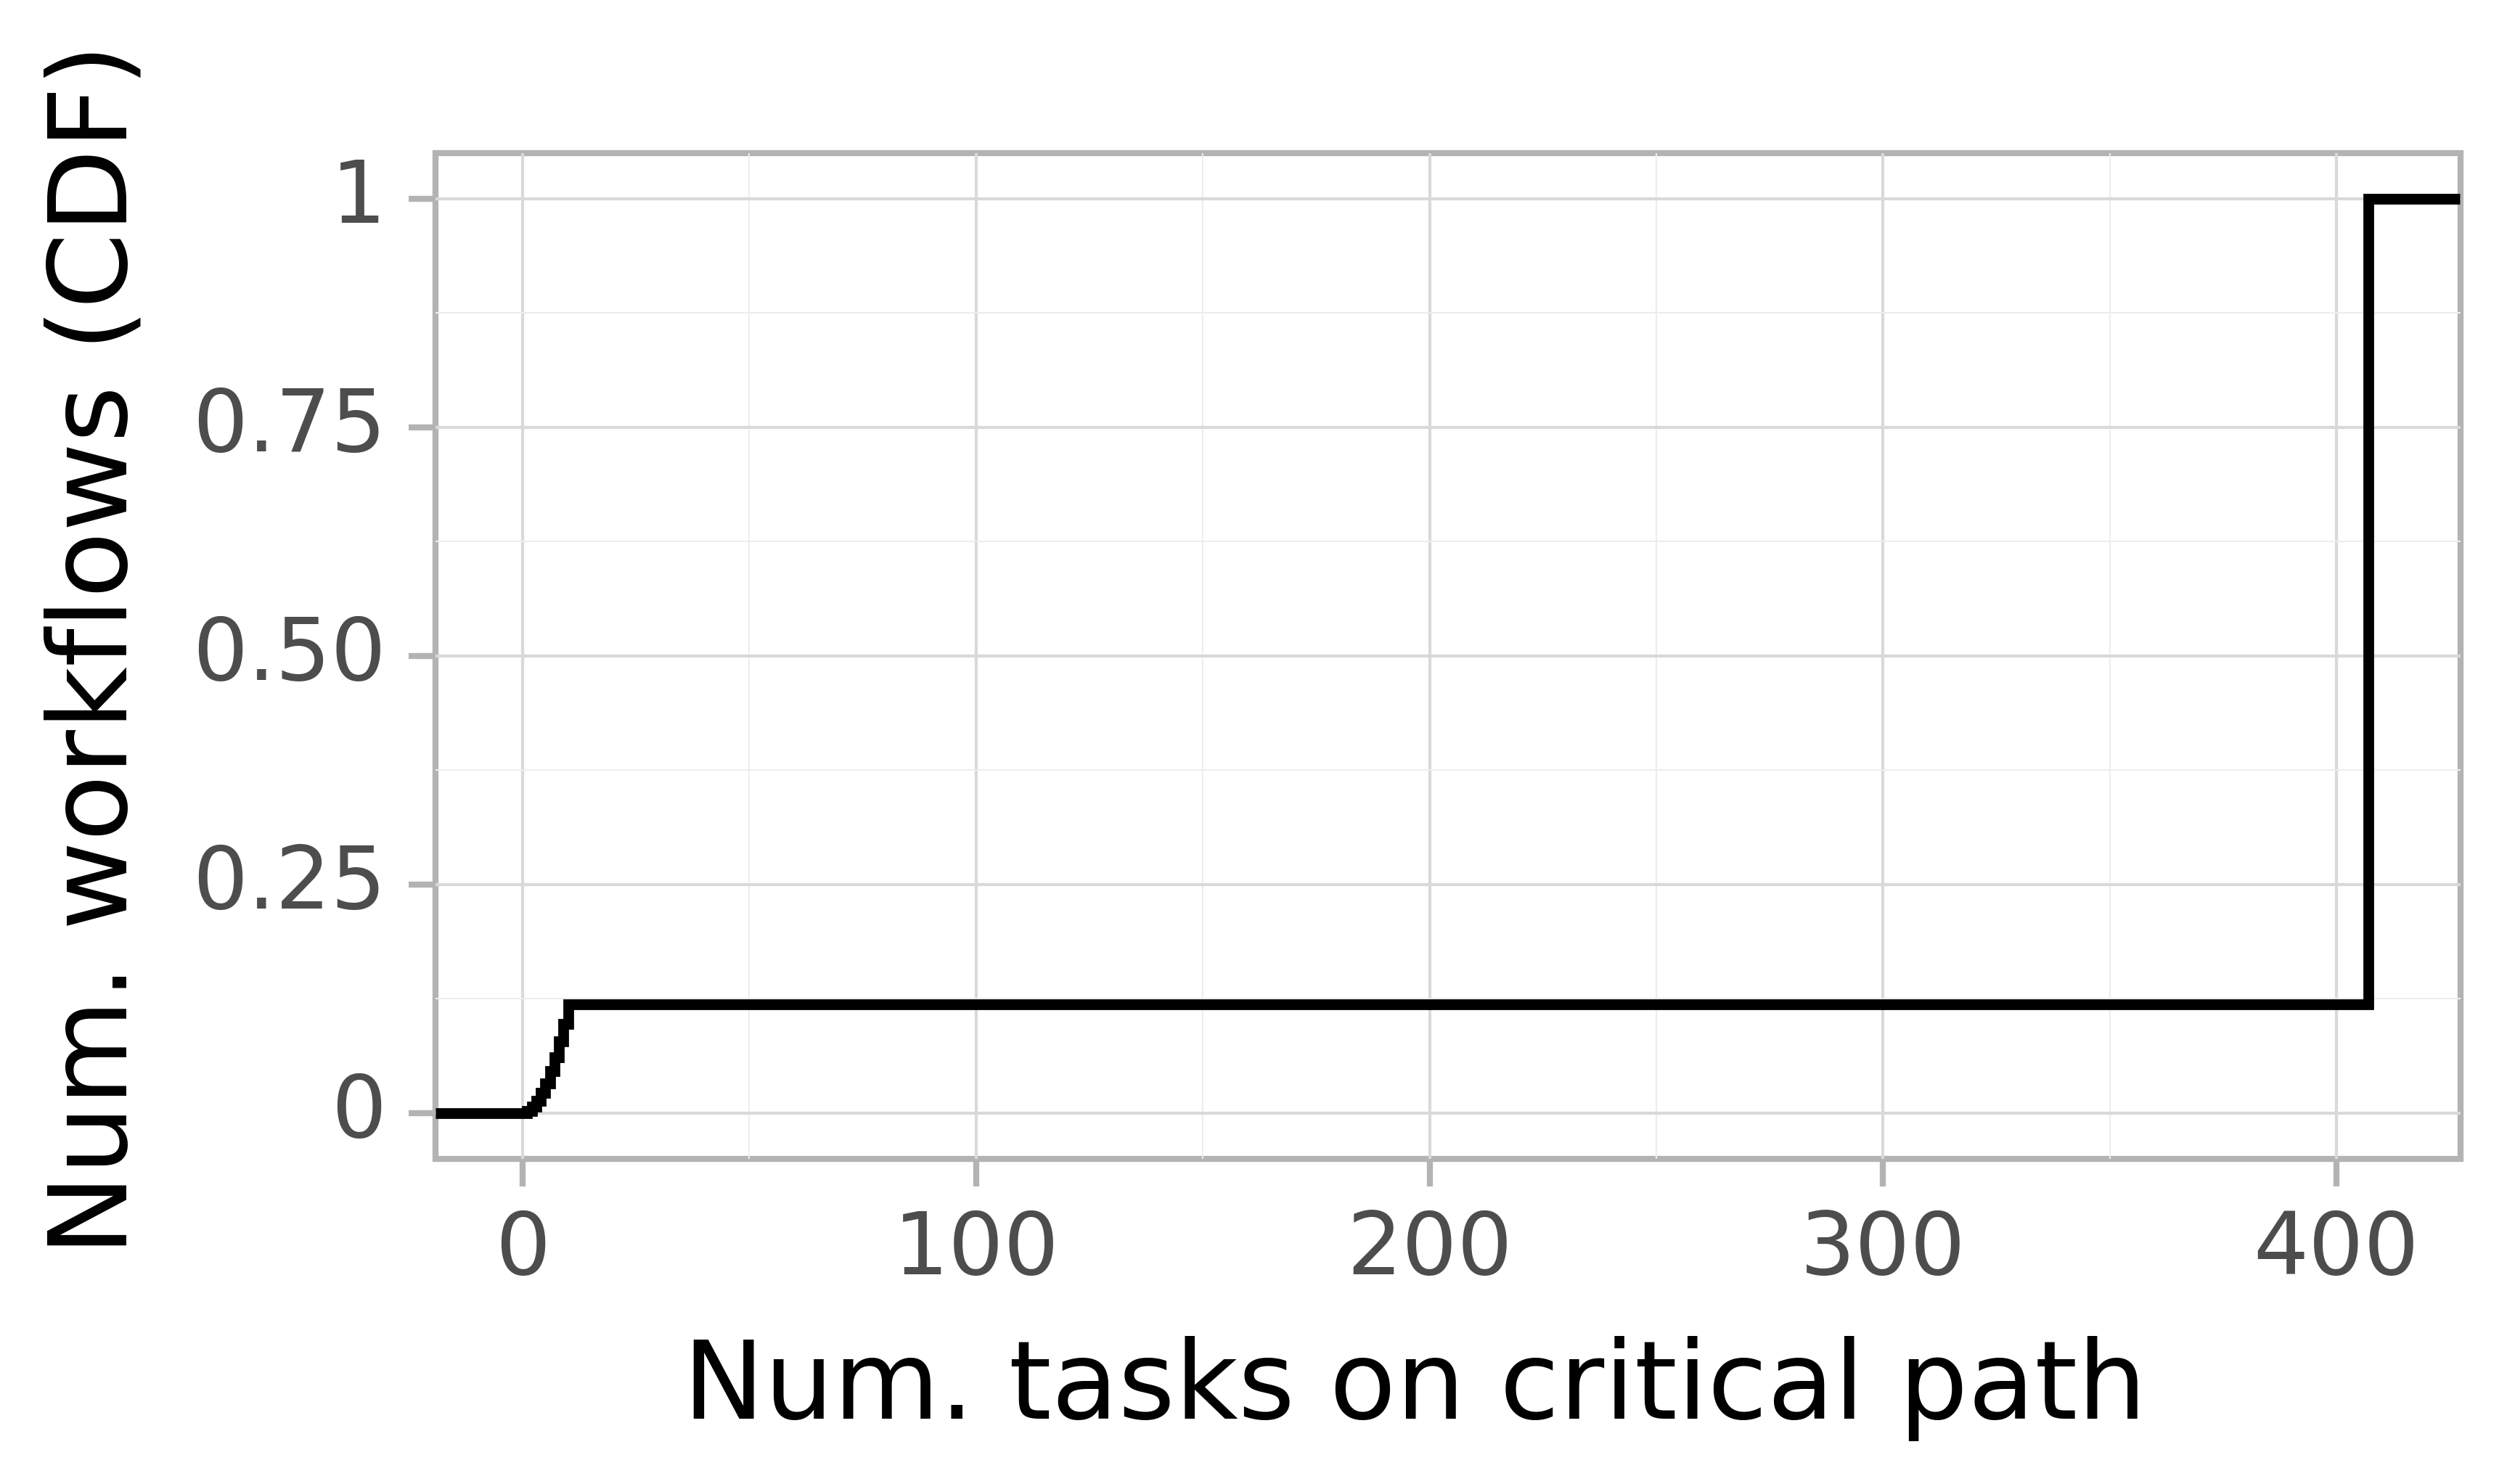 Job critical path task count graph for the askalon_ee trace.